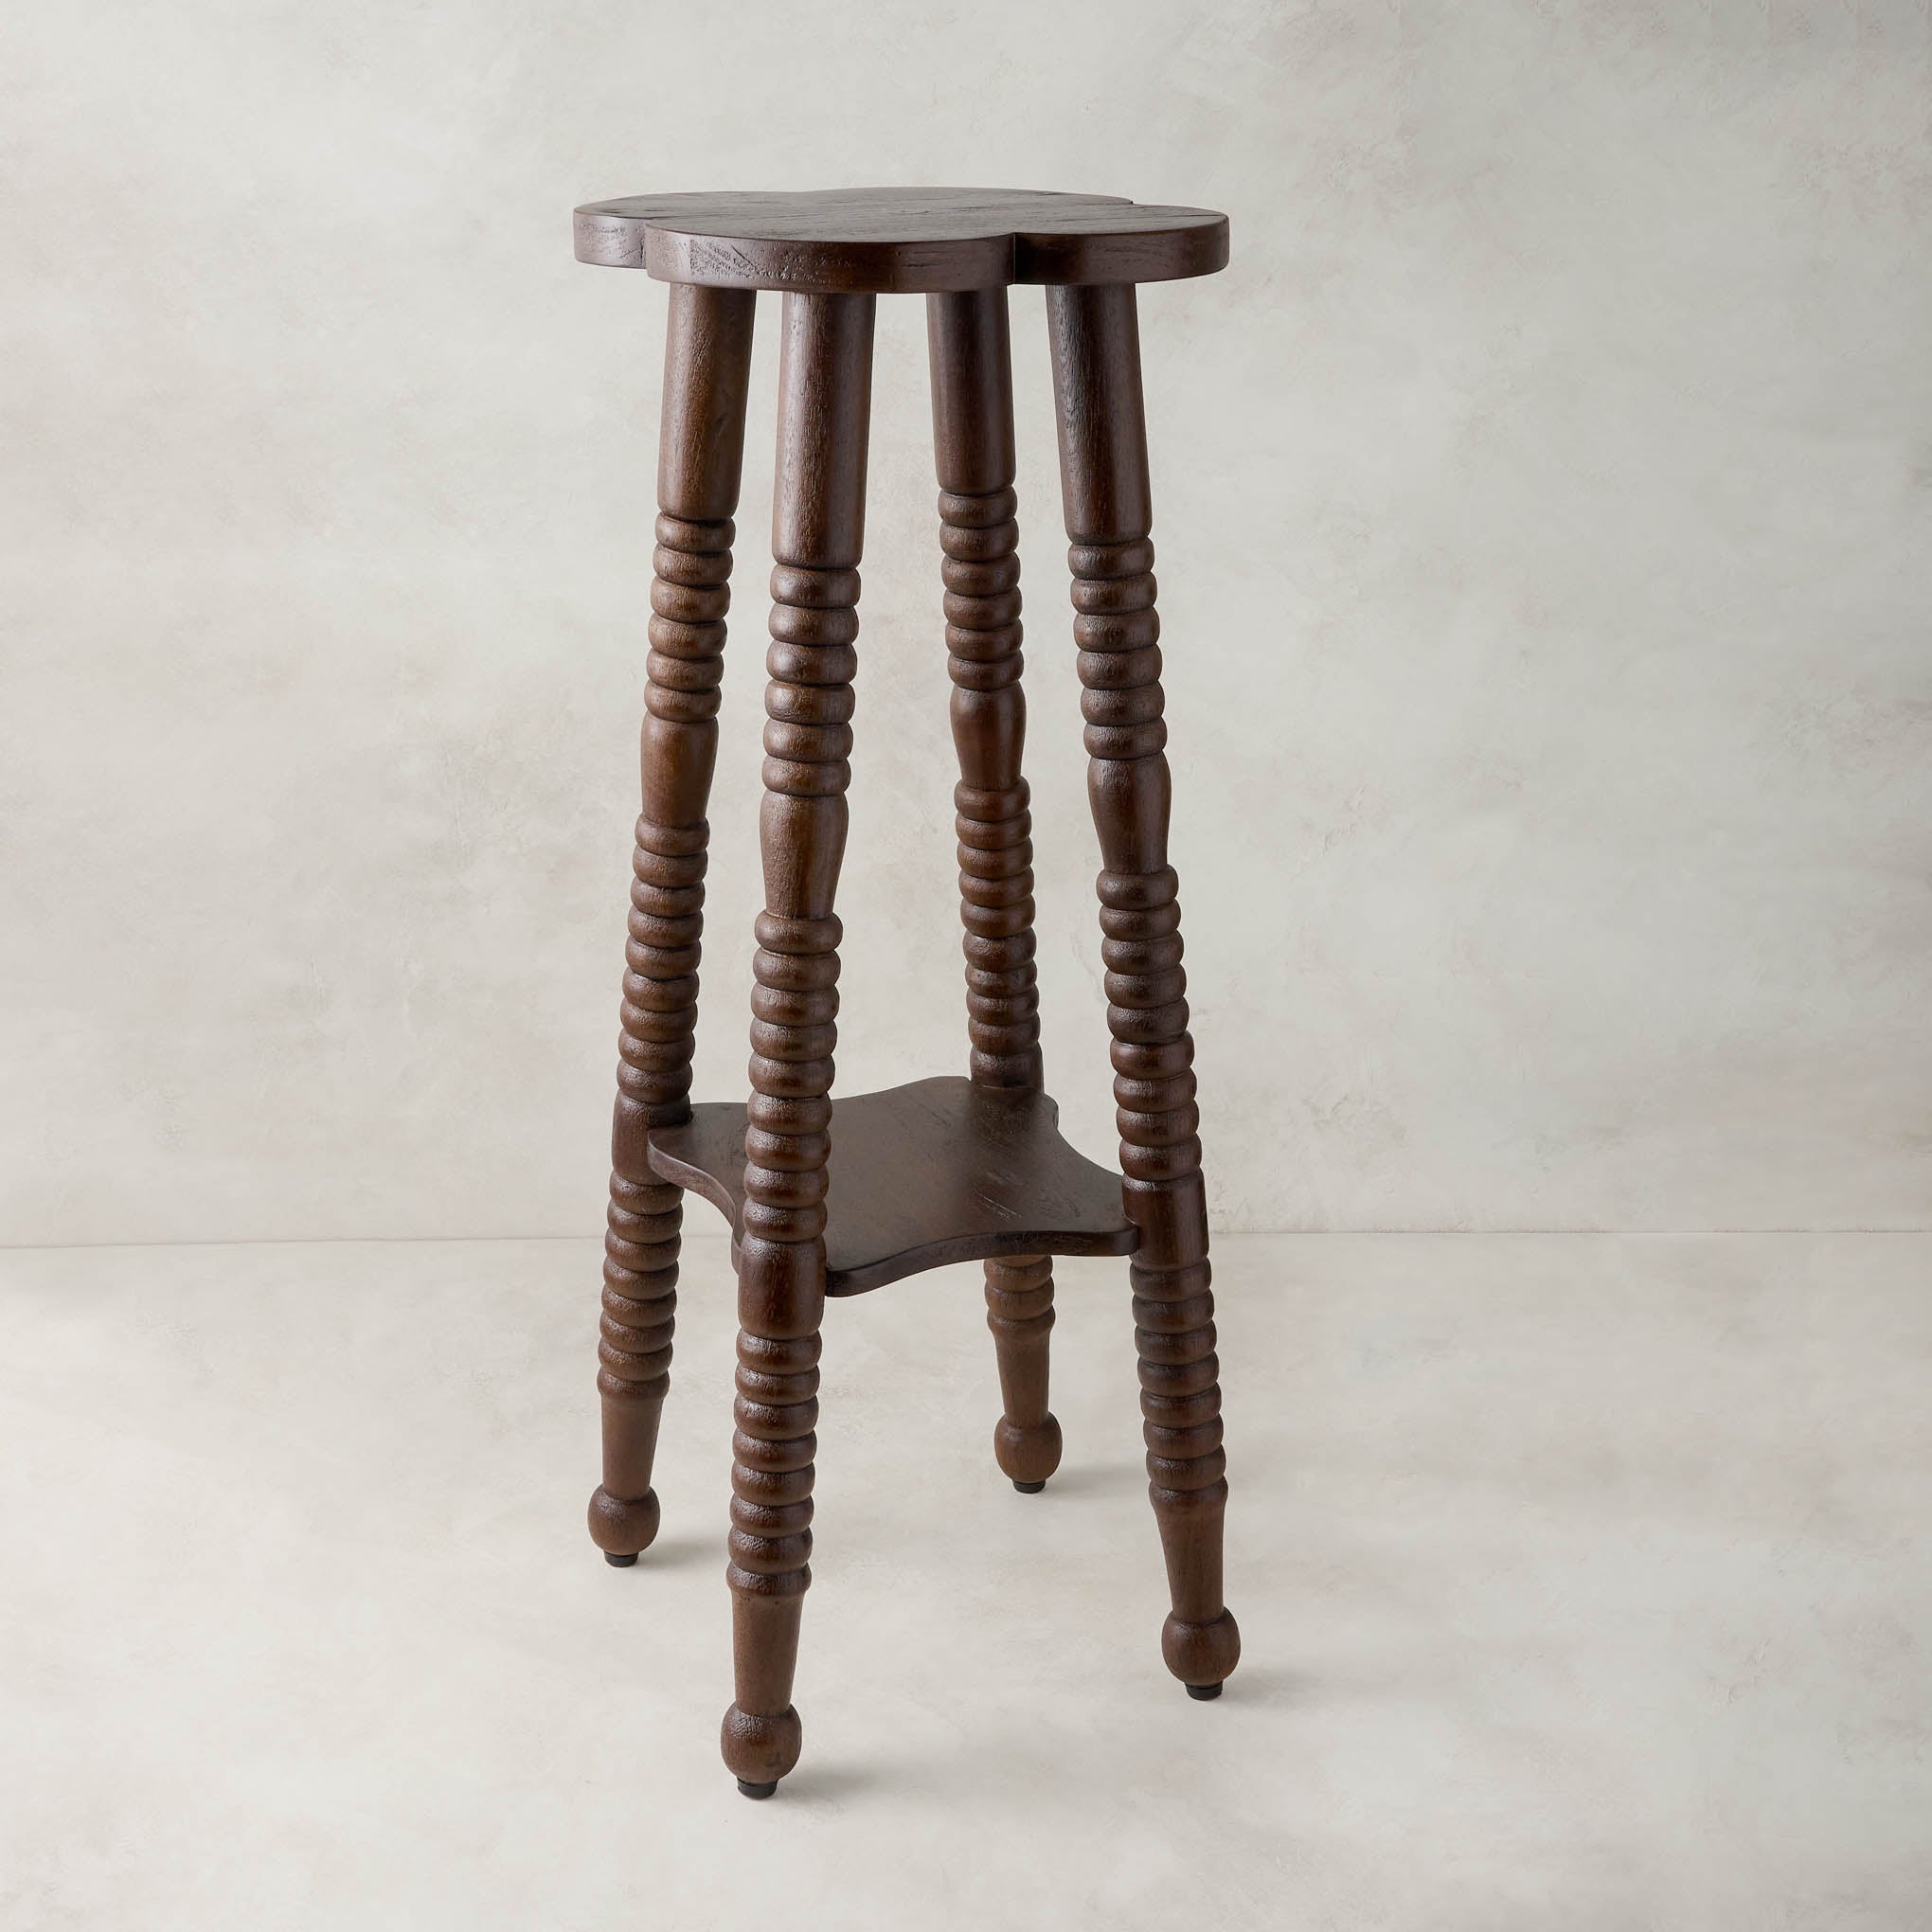 Jude Accent Table in heritage wood $199.00